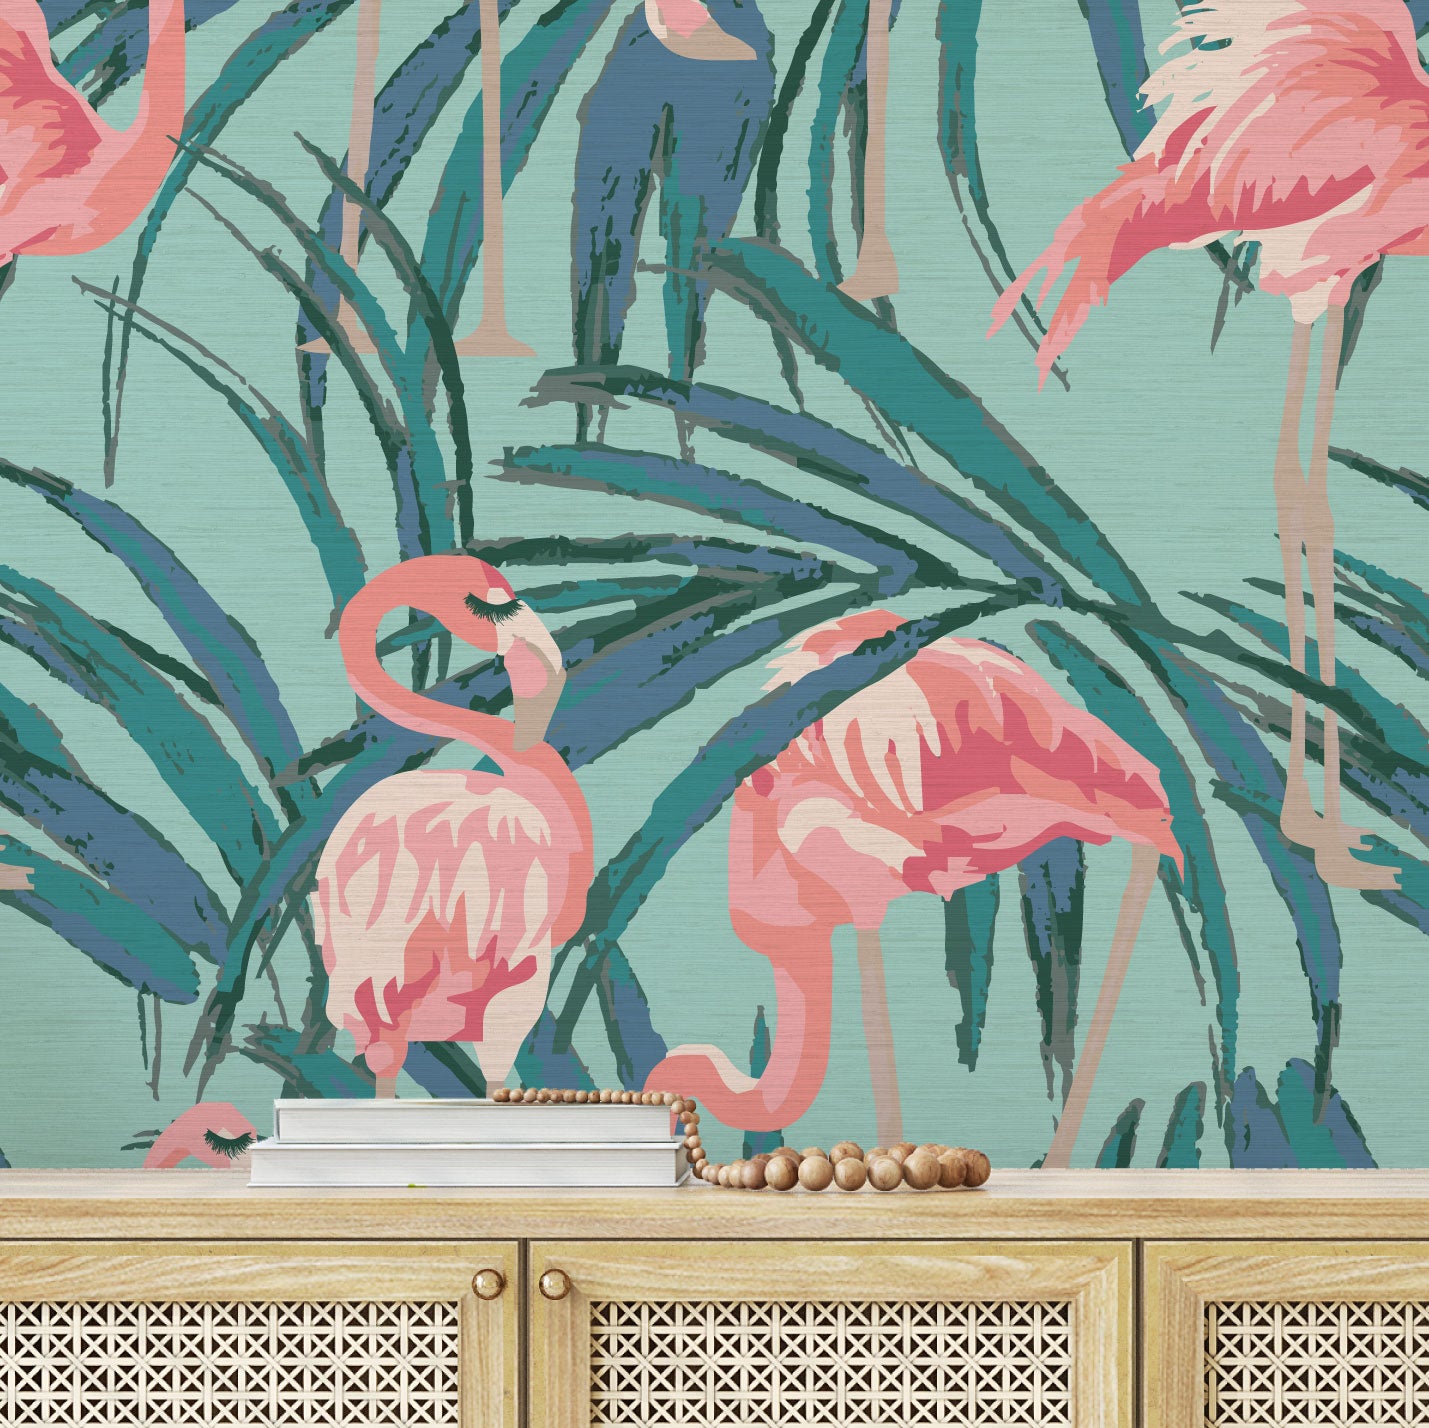 light blue teal printed grasscloth wallpaper with oversized palm leaves layered with extra large flamingos in shades of pink luscious eyelashes brow beauty bar medspa salon Grasscloth Natural Textured Eco-Friendly Non-toxic High-quality Sustainable practices Sustainability Interior Design Wall covering Bold Wallpaper Custom Tailor-made Retro chic Tropical Beauty Hair Garden jungle Seaside Coastal Seashore Waterfront Vacation home styling Retreat Relaxed Beach cottage animal bird palm leaf tree